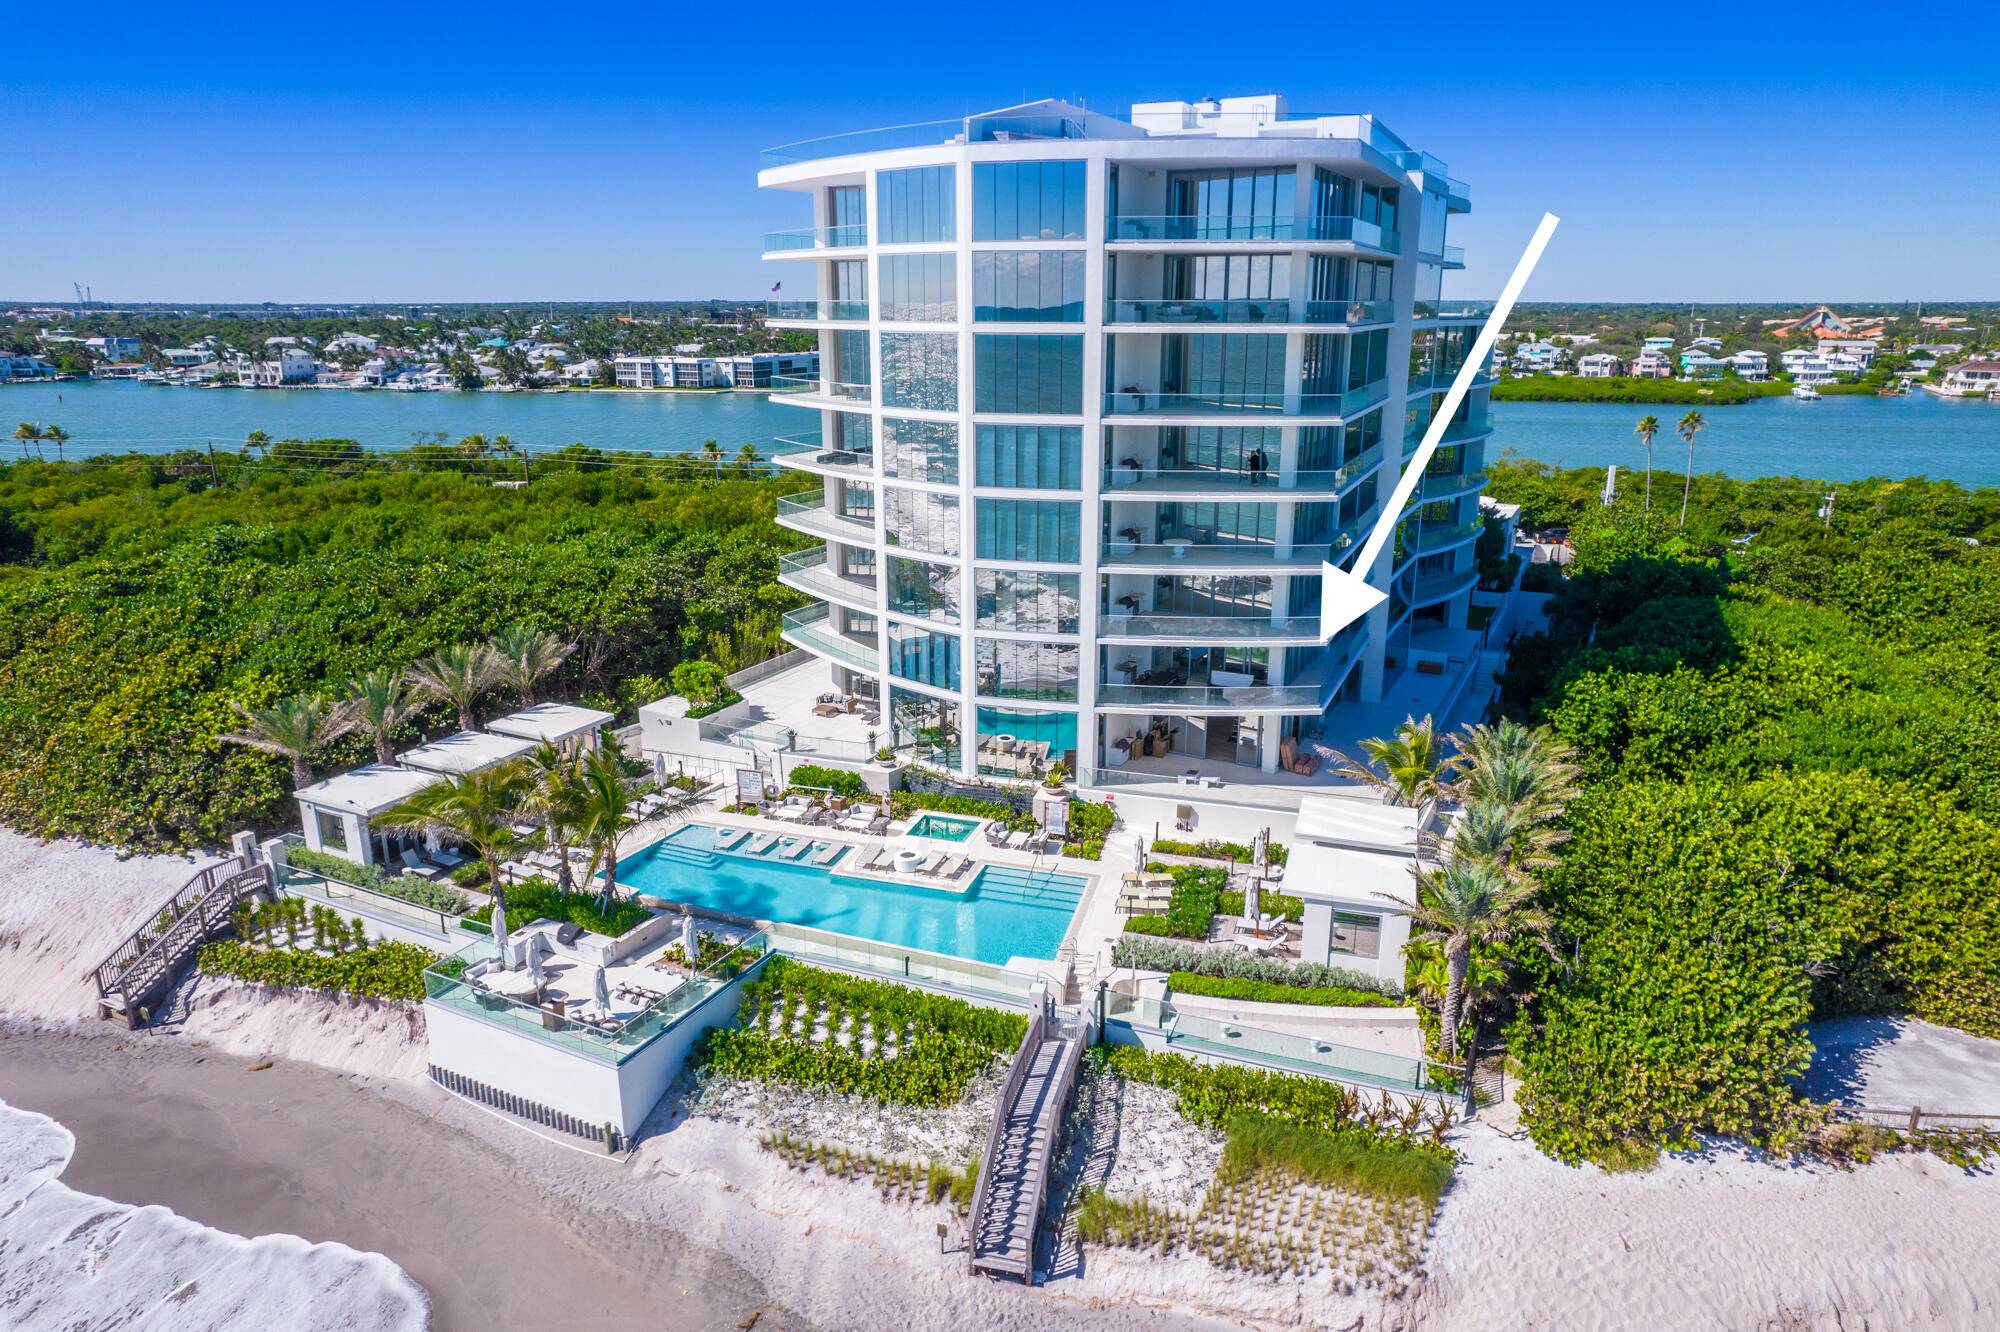 An exceptional opportunity awaits to own this extraordinary, designer luxury residence within the prestigious SeaGlass Condominium on Jupiter Island, boasting uninterrupted and breathtaking ocean vistas.